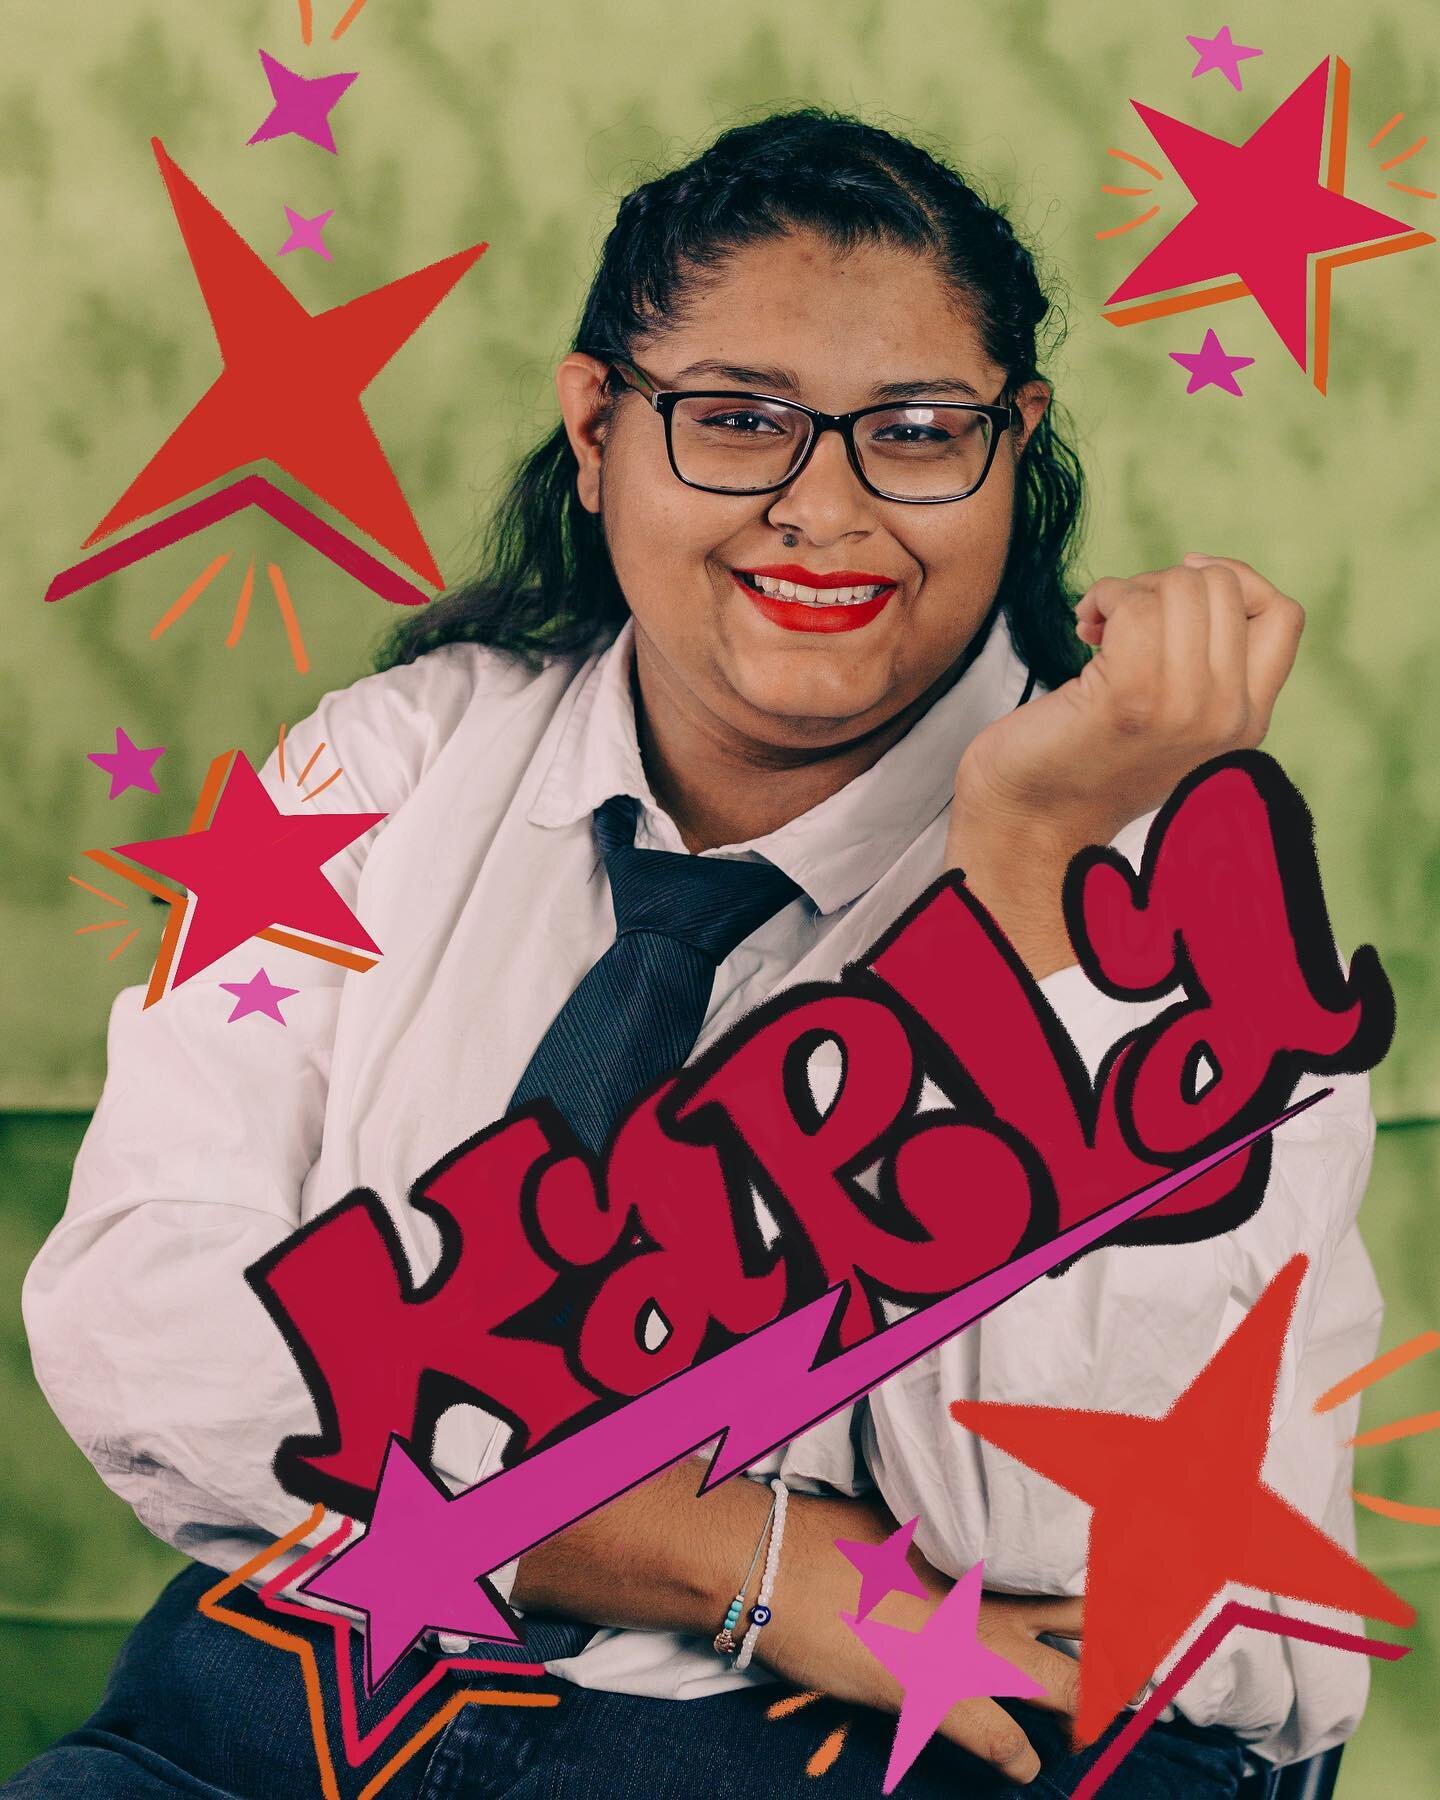 She&rsquo;s a STAAAR! 

Our next fellow needs no introduction, but in case you didn&rsquo;t know her, it&rsquo;s Karla Gonzalez! ♎️🌟

Karla (she/her) is a 16 year-old sophomore at Santa Fe South Highschool🏐

She loves reading, baking 🍰, and listen